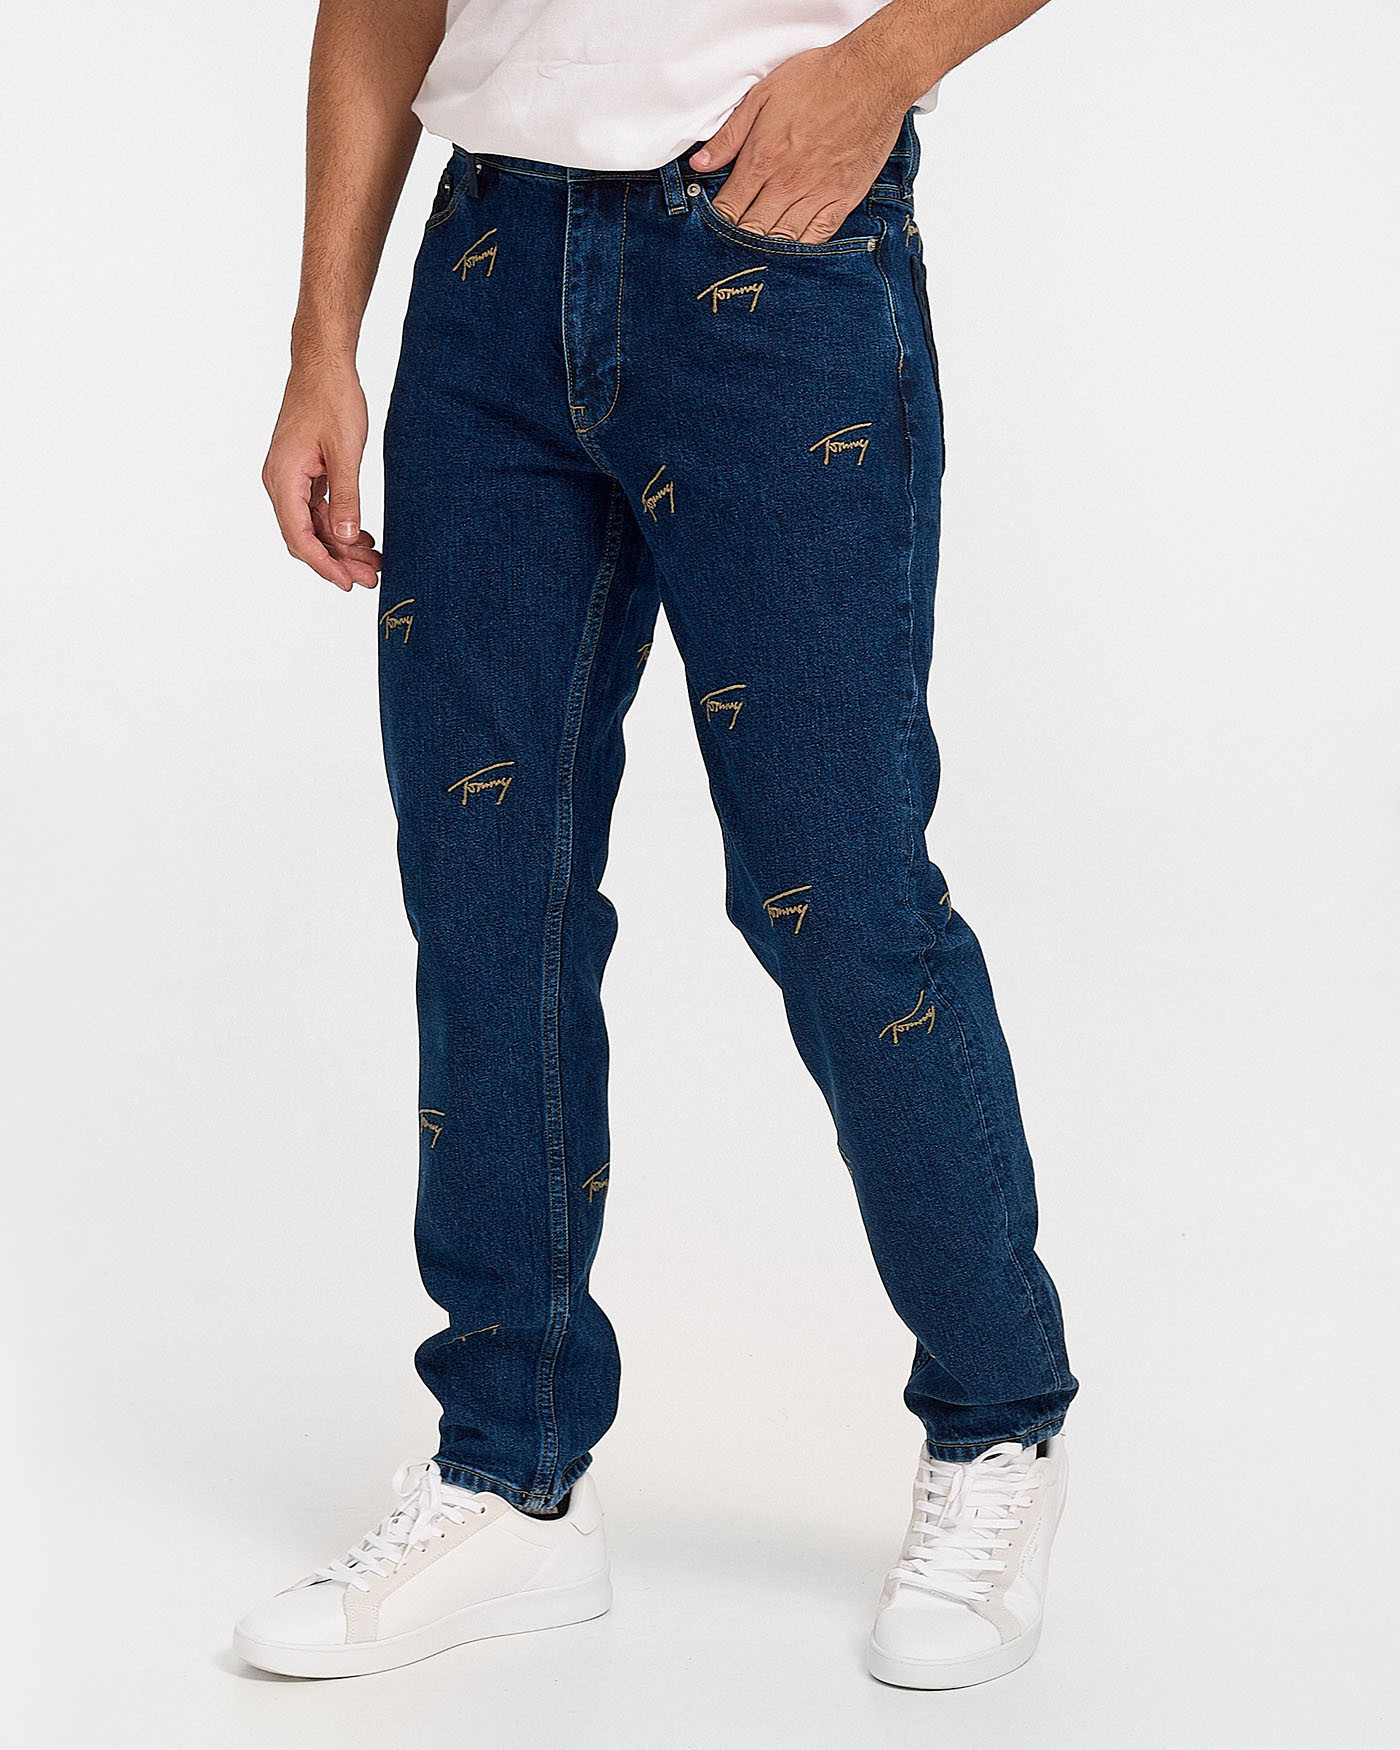 TOMMY HILFIGER DAD TAPERED DM0DM11501 JEANS - LOGO EMBROIDERY